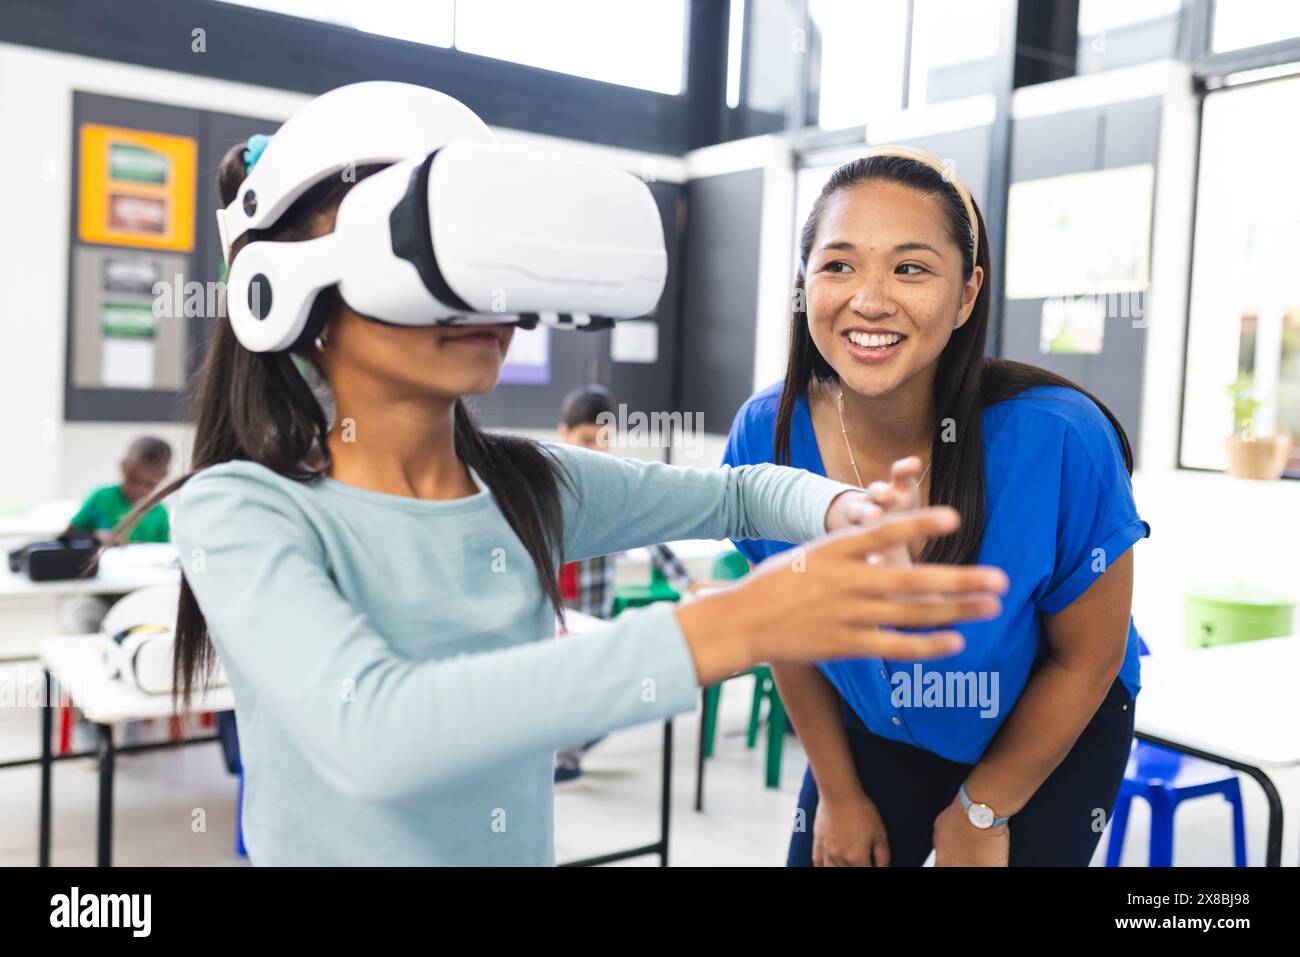 In school, middle-aged biracial teacher guides a young biracial student using VR in the classroom Stock Photo